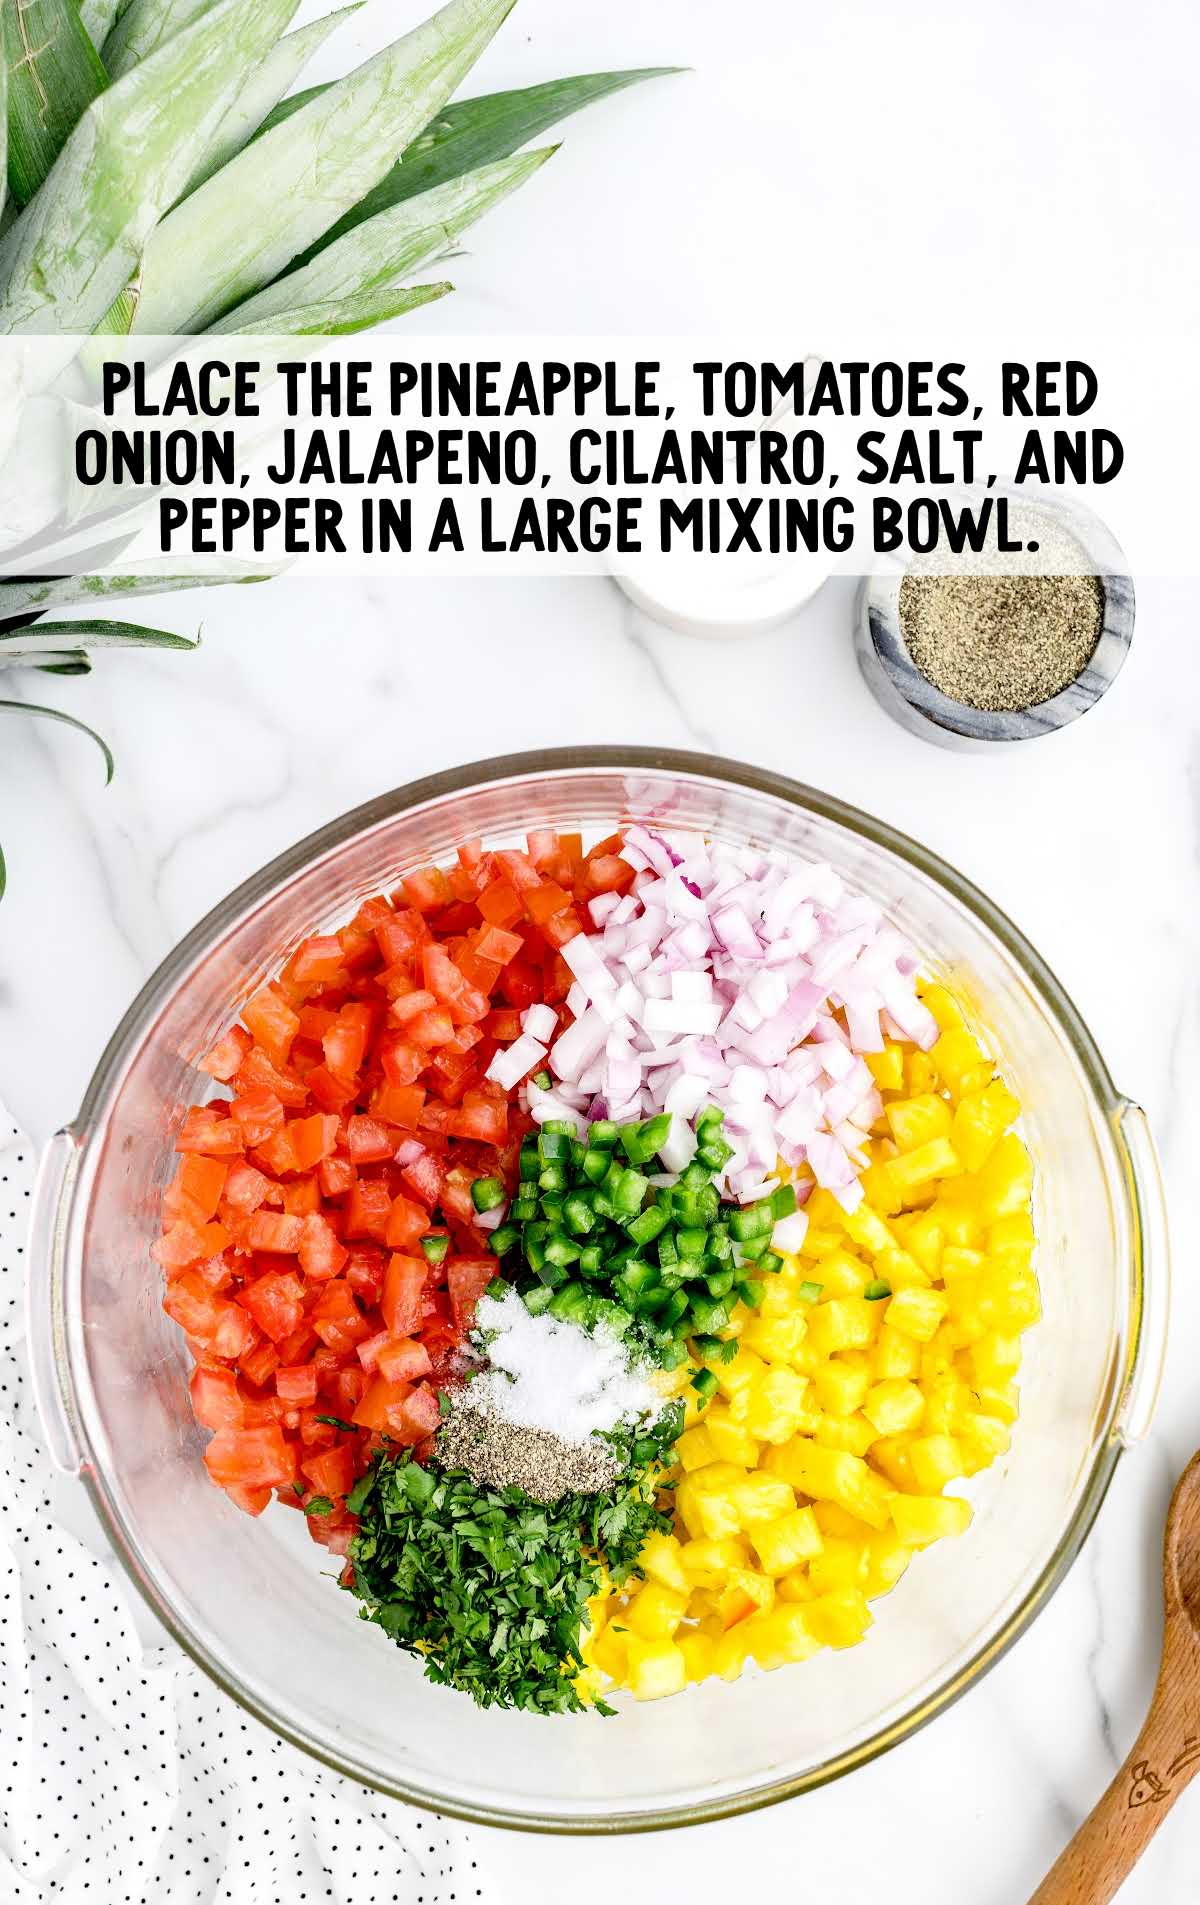 pineapple, tomatoes, red onions, jalapeño, cilantro, salt, and pepper combined in a bowl